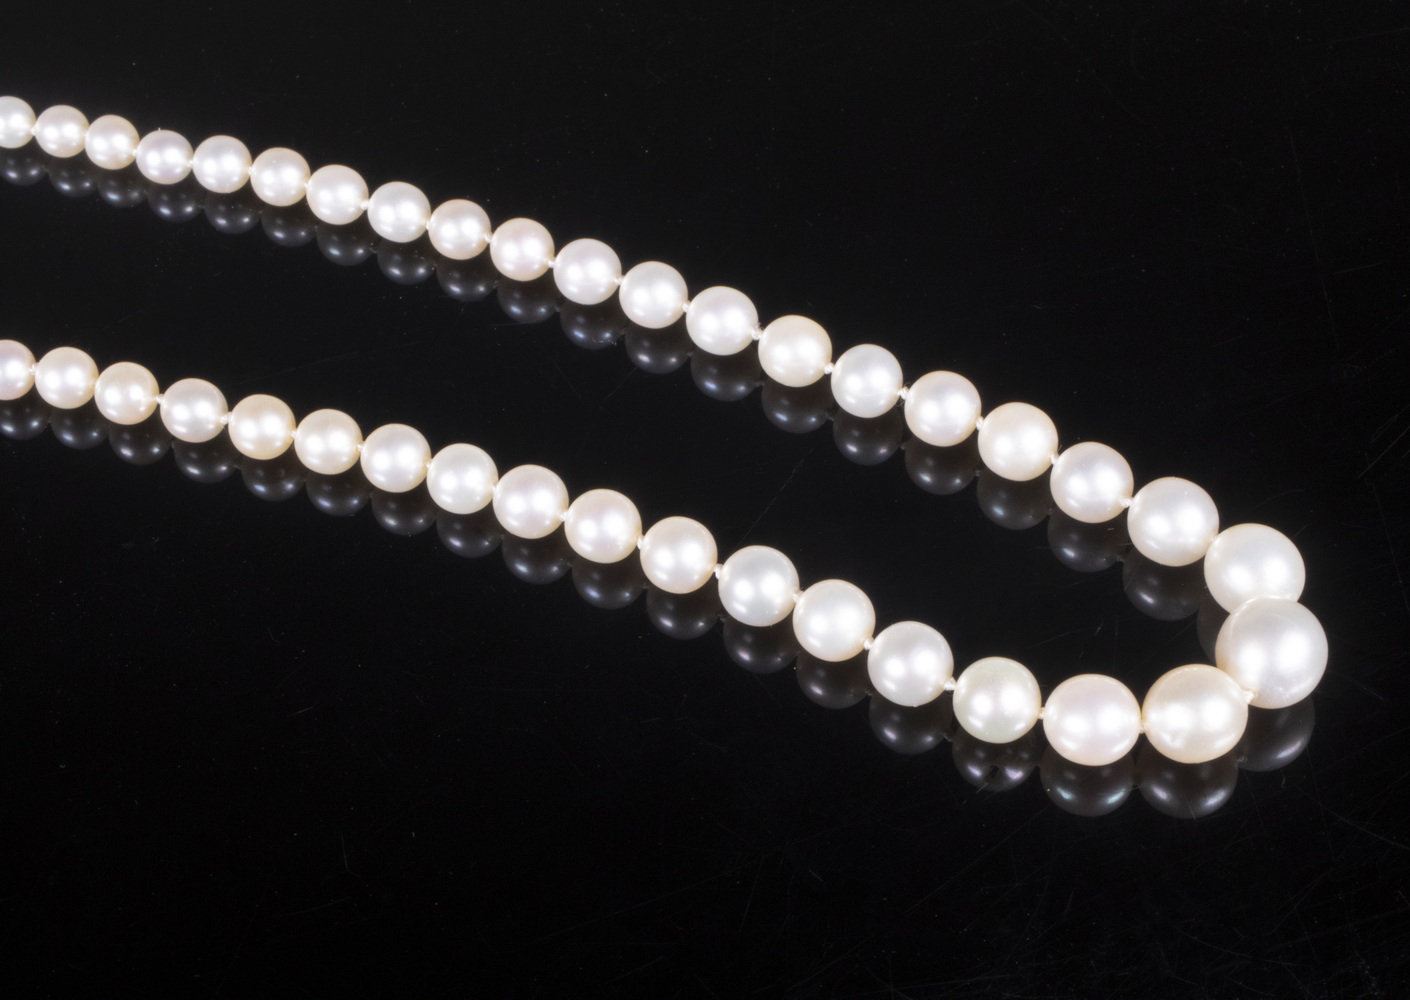 ANTIQUE SALTWATER PEARL NECKLACE